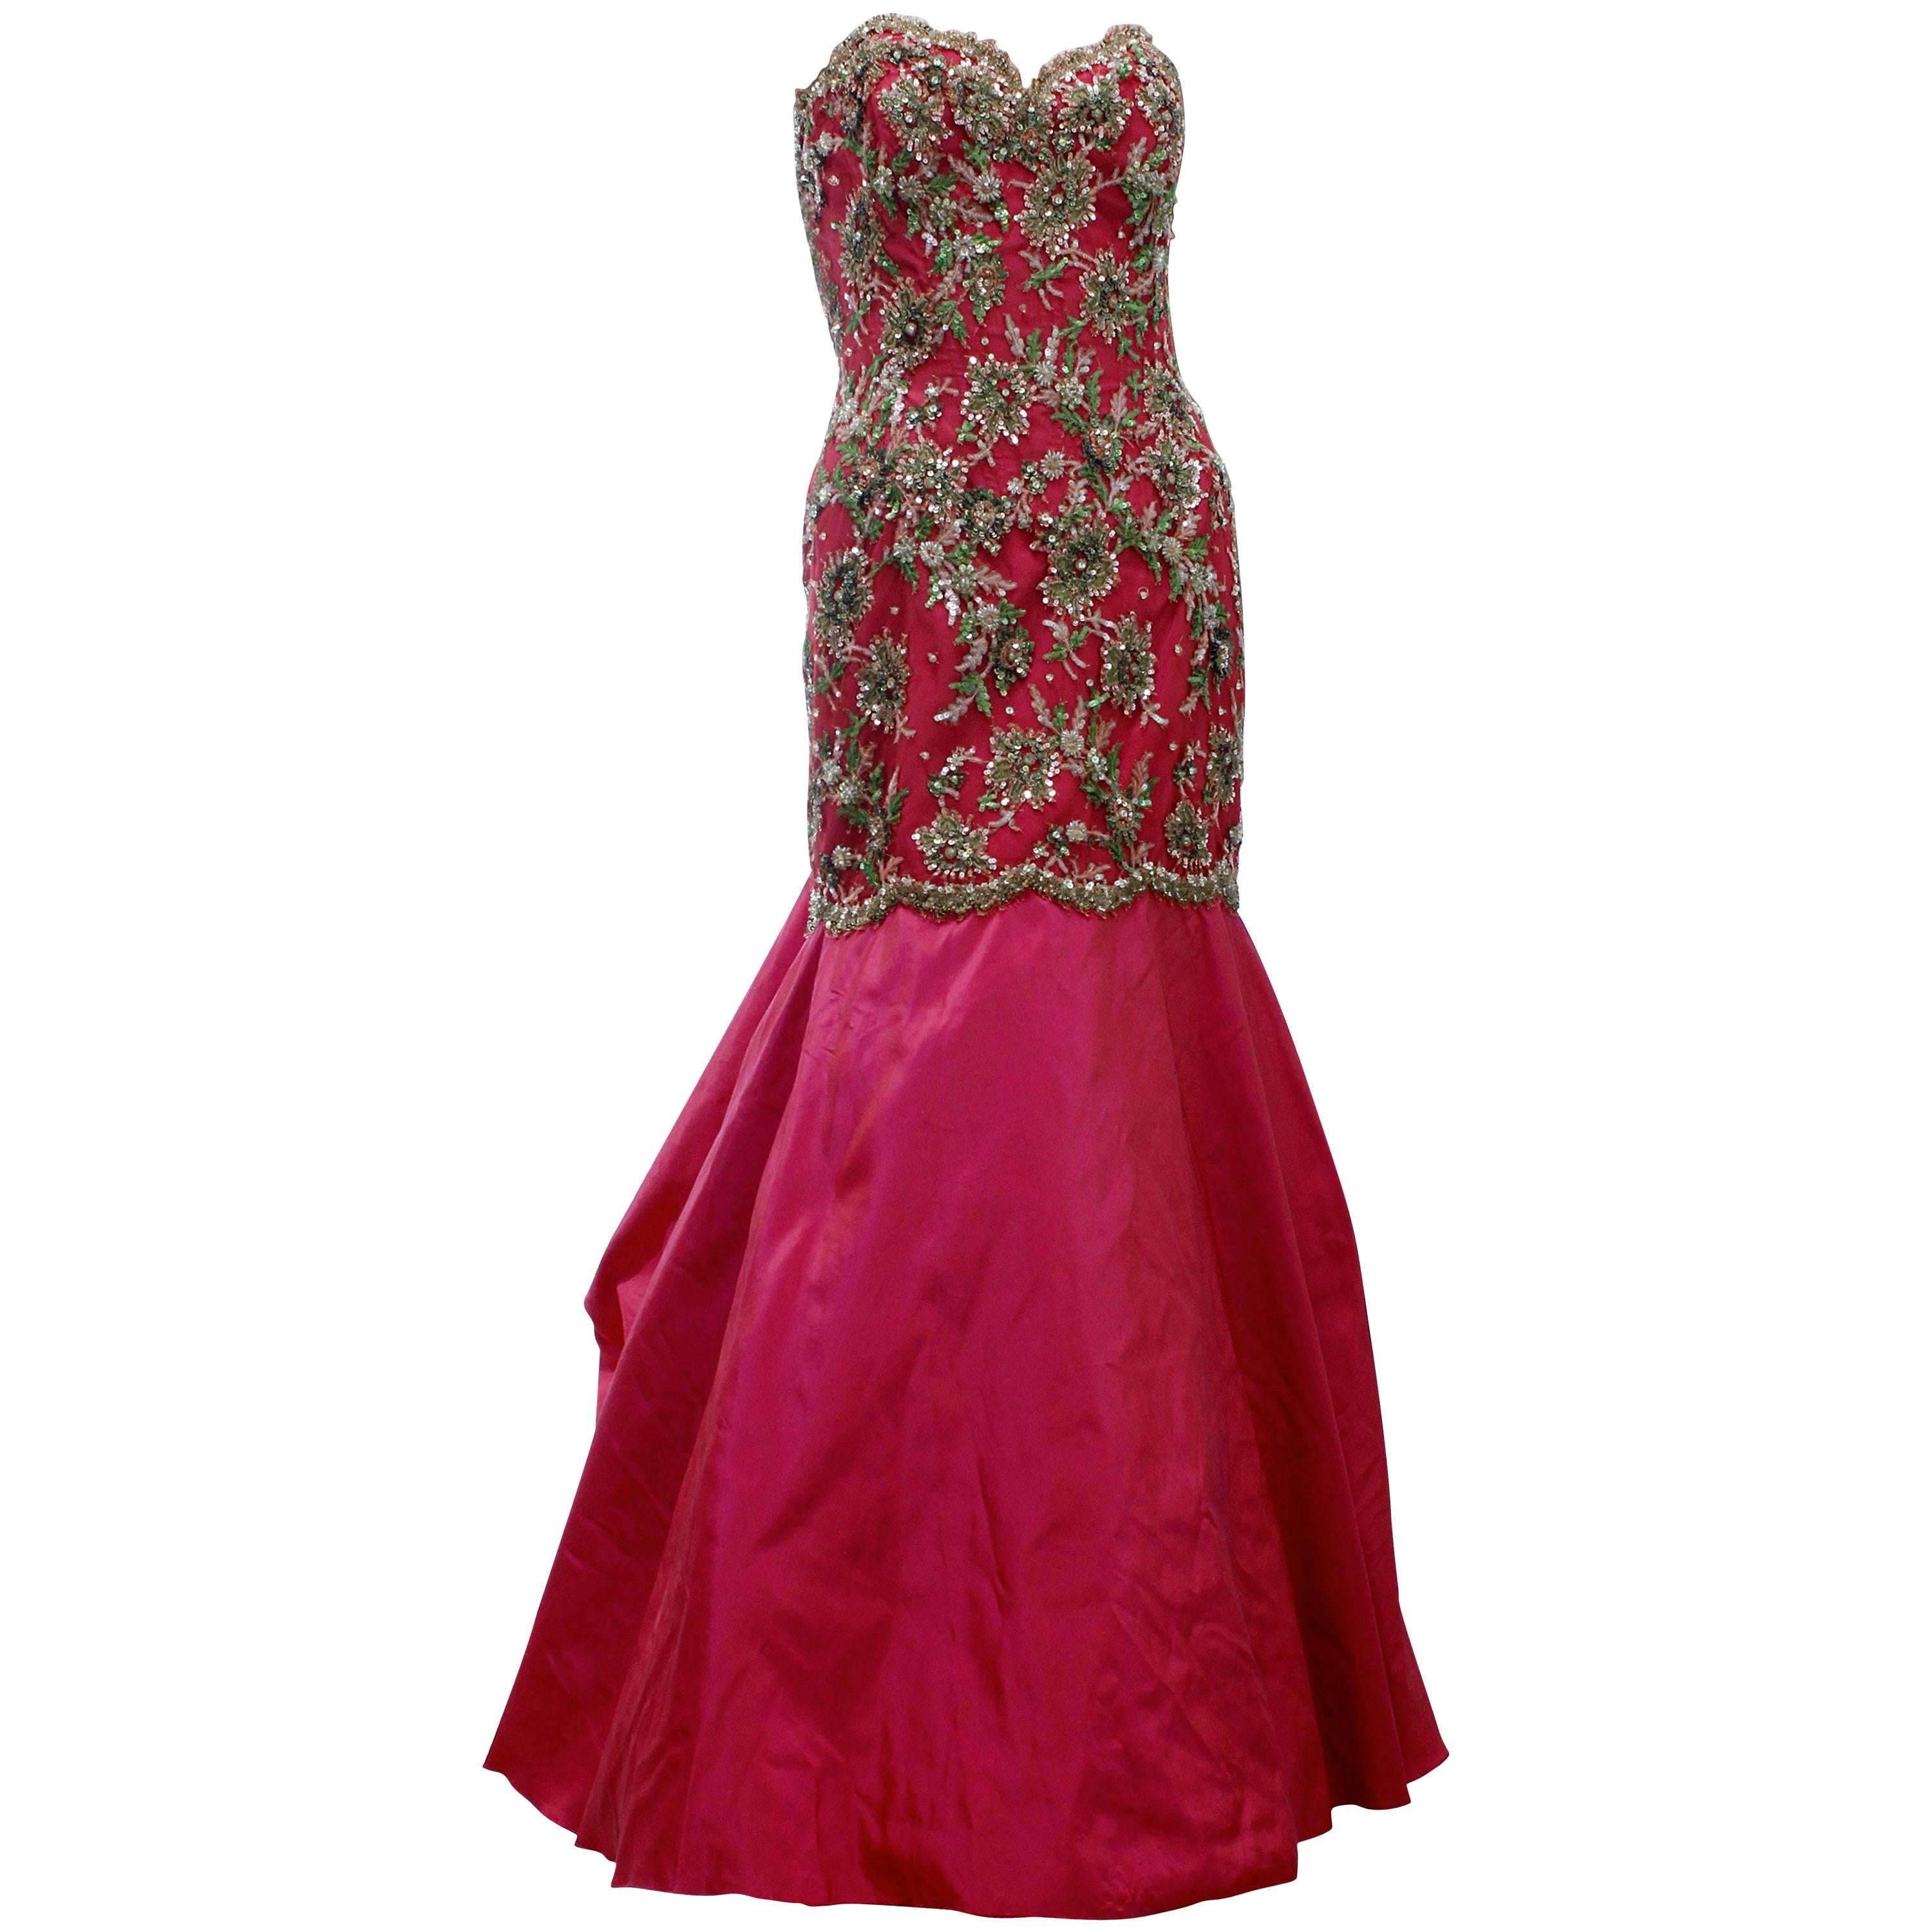 This unique sleeveless evening gown was designed by Vicky Tiel Couture, likely in the 1990s.  Made from a rose pink silk blend taffeta, it features a trumpet or mermaid silhouette and an intricately beaded and sequined bodice.  Fully-lined with